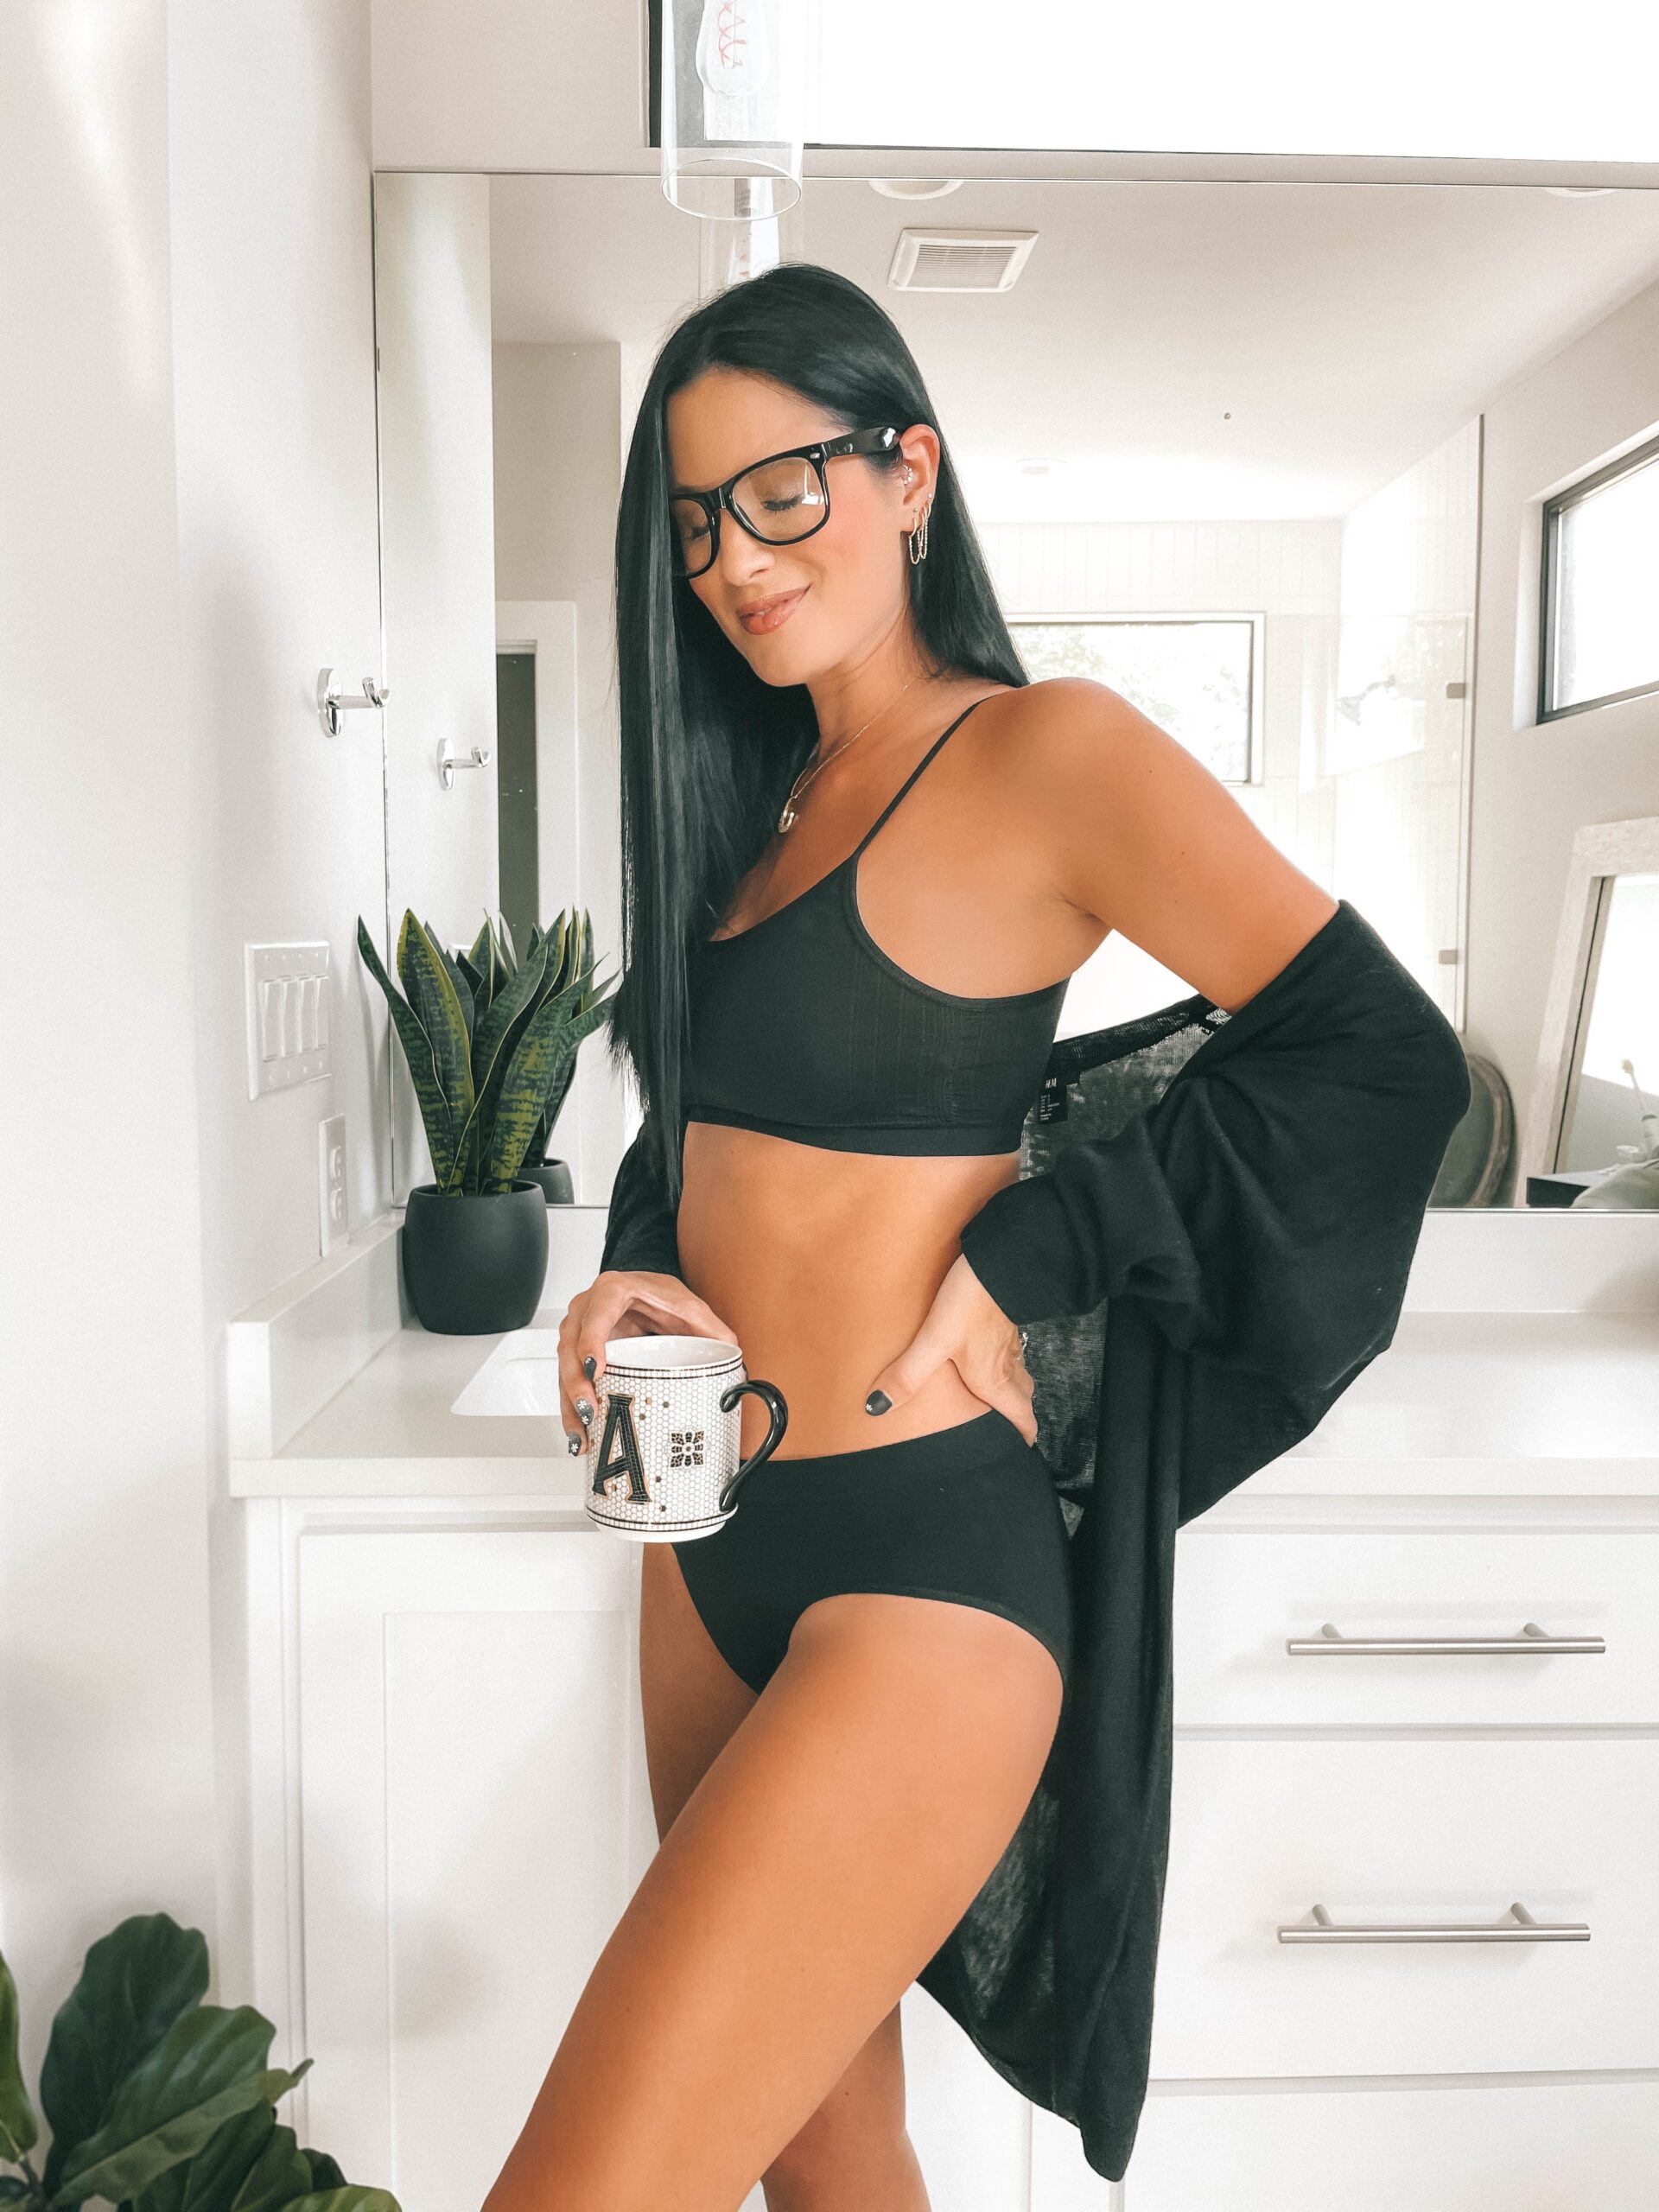 Comfy Bras by popular Austin fashion blog, Dressed to kill: image of a woman standing in her bathroom and holding a monogram mug while wearing a black duster sweater, black frame glasses, and black bra and undies set. 